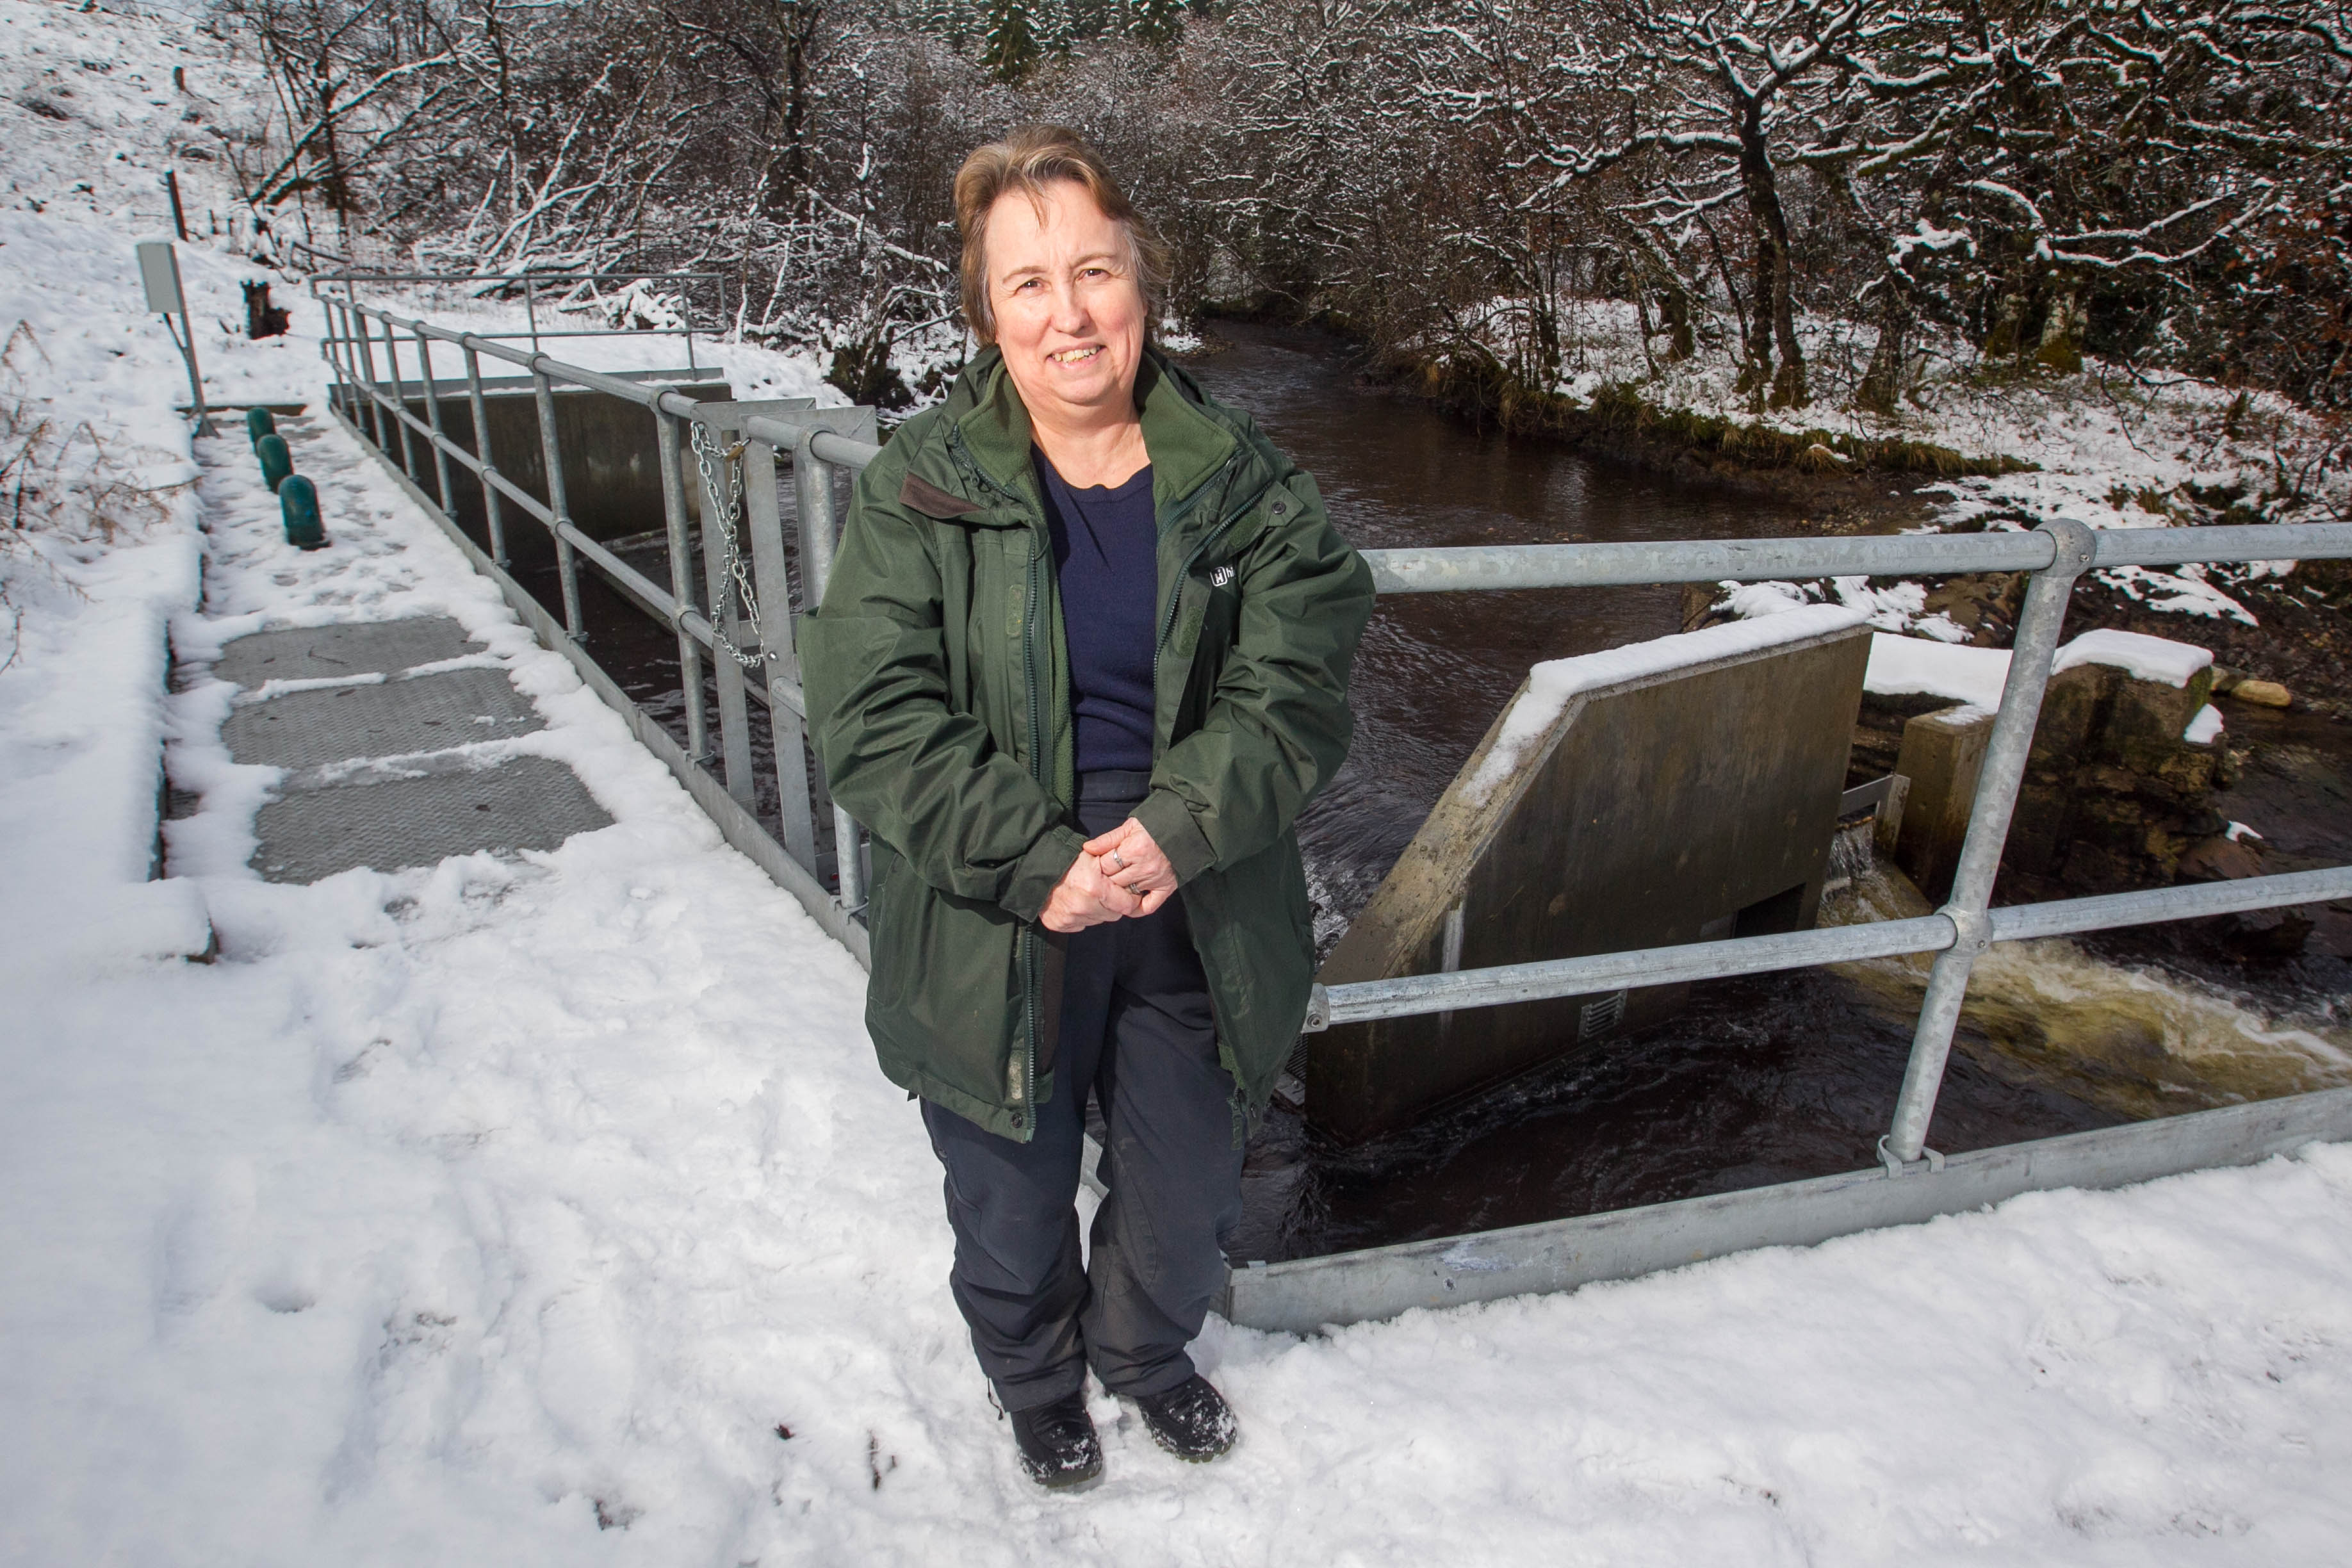 Carol Thomas is hoping the Hydro Power scheme will give good returns